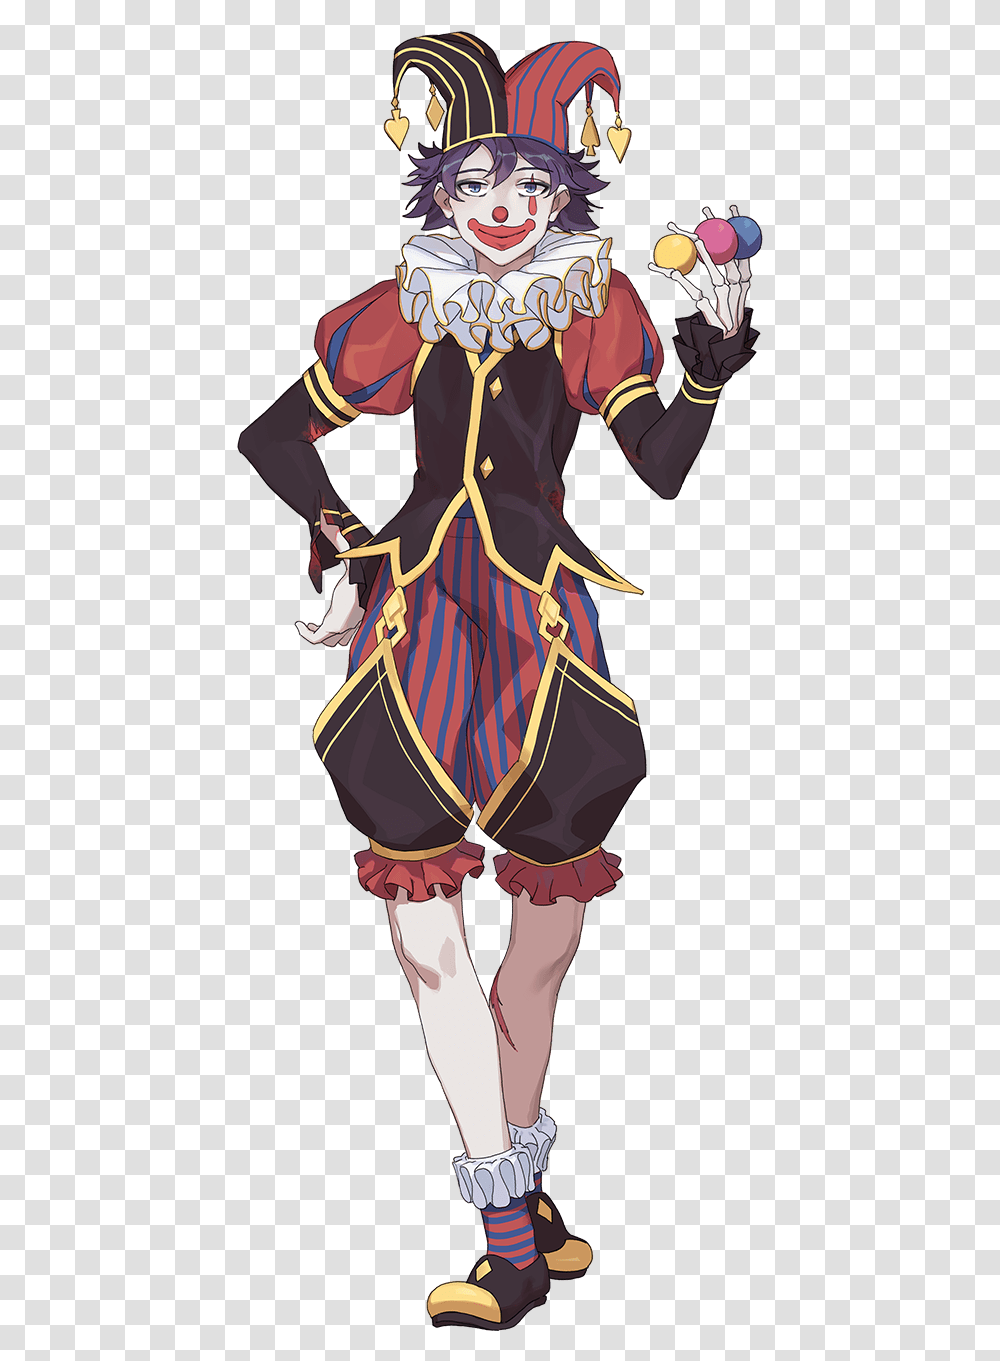 Food Fantasy Wiki Fantasy Clown Designs, Costume, Person, Performer Transparent Png